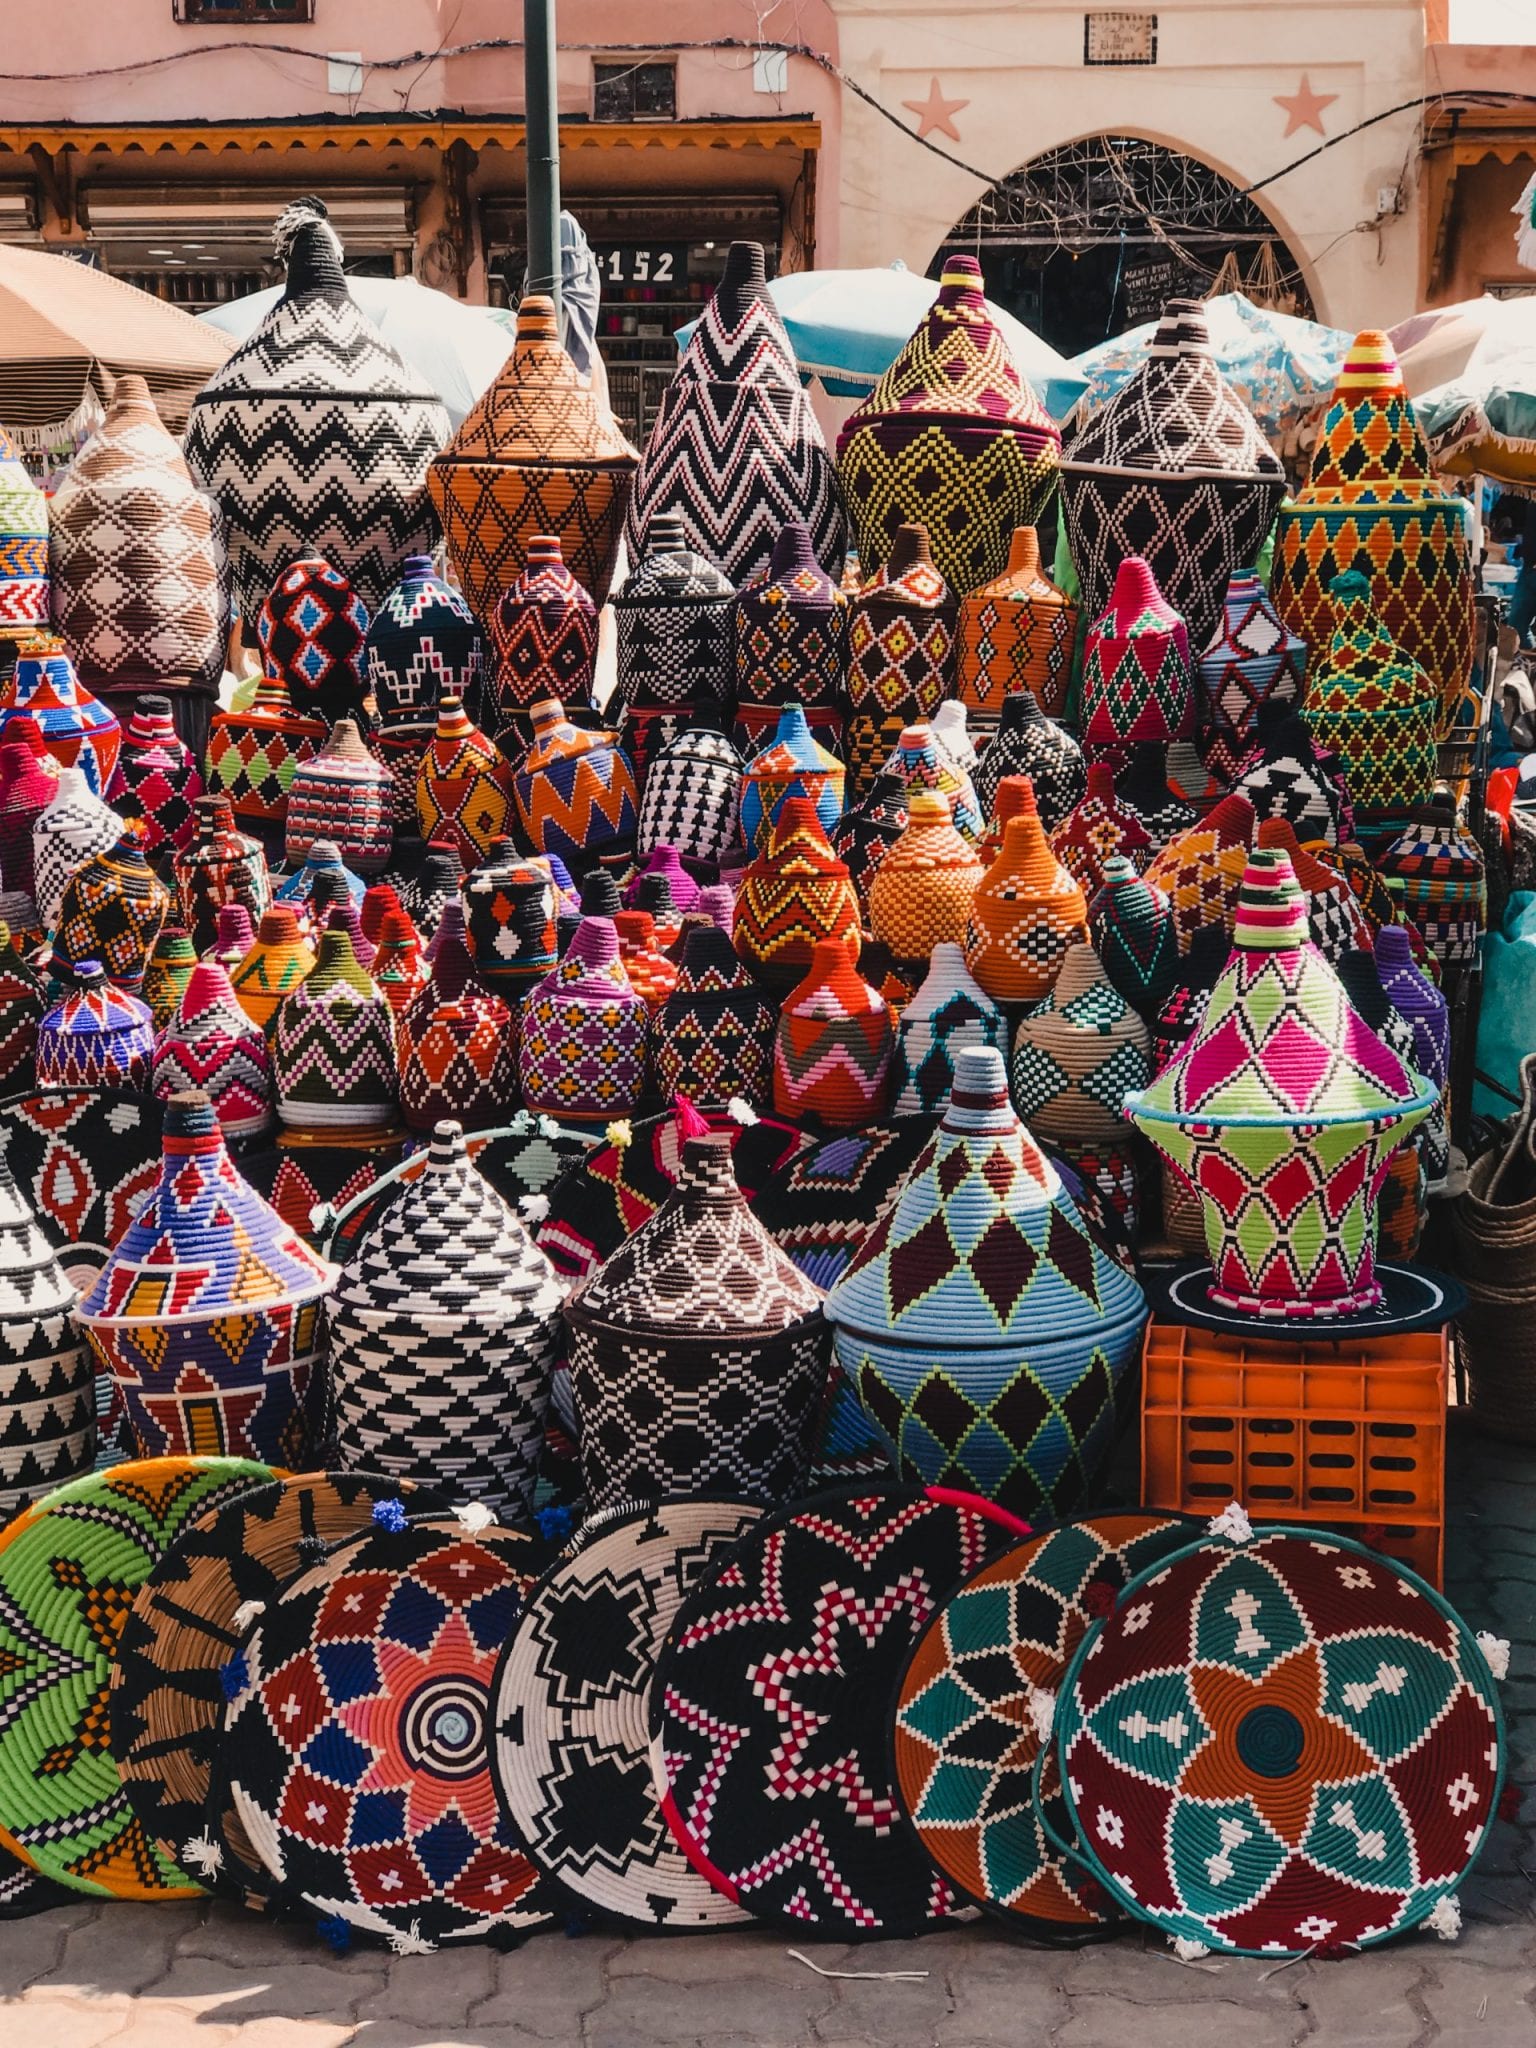 Woven baskets in outdoor market Morocco